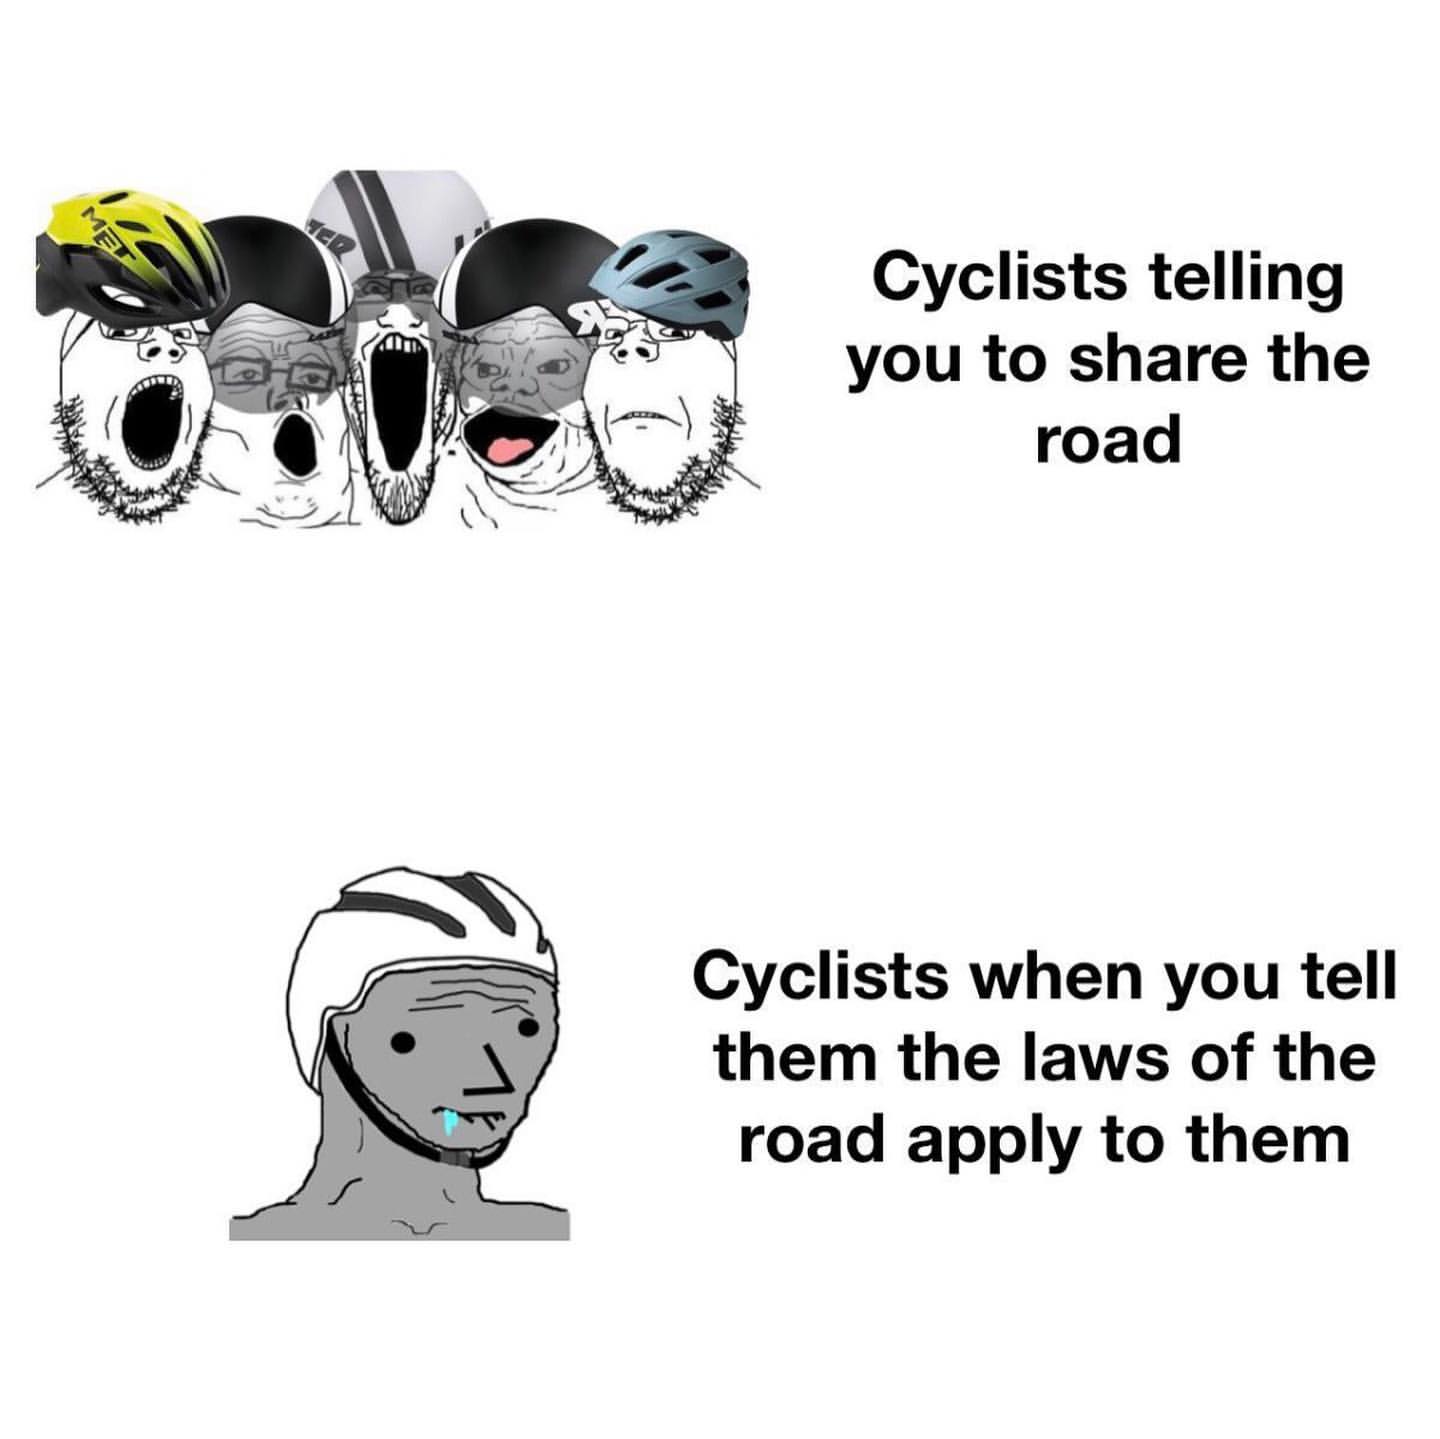 Cyclists telling you to share the road.  Cyclists when you tell them the laws of the road apply to them.